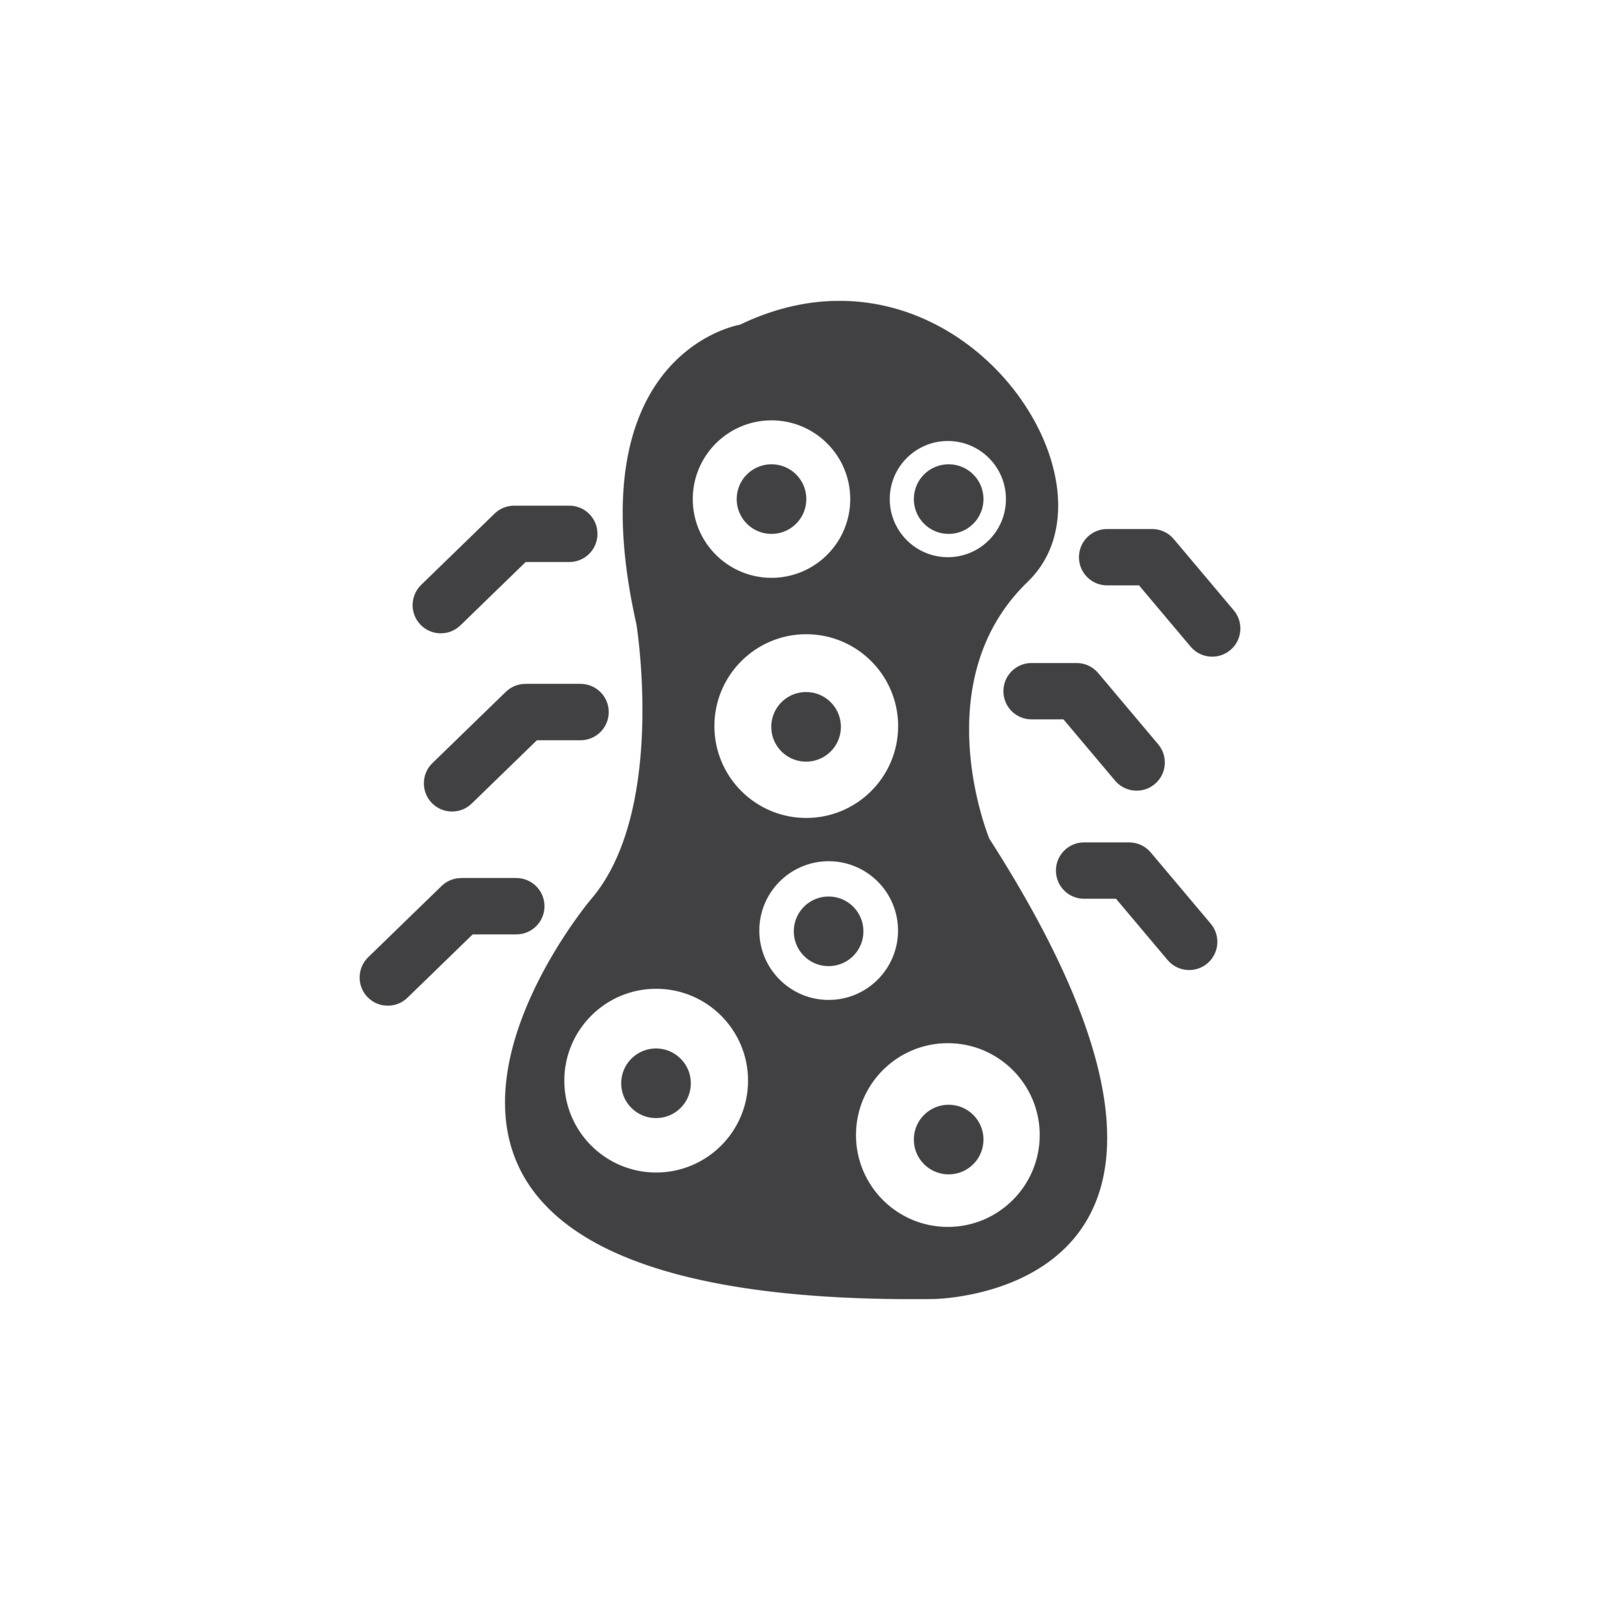 bacteria icon design by iconmama